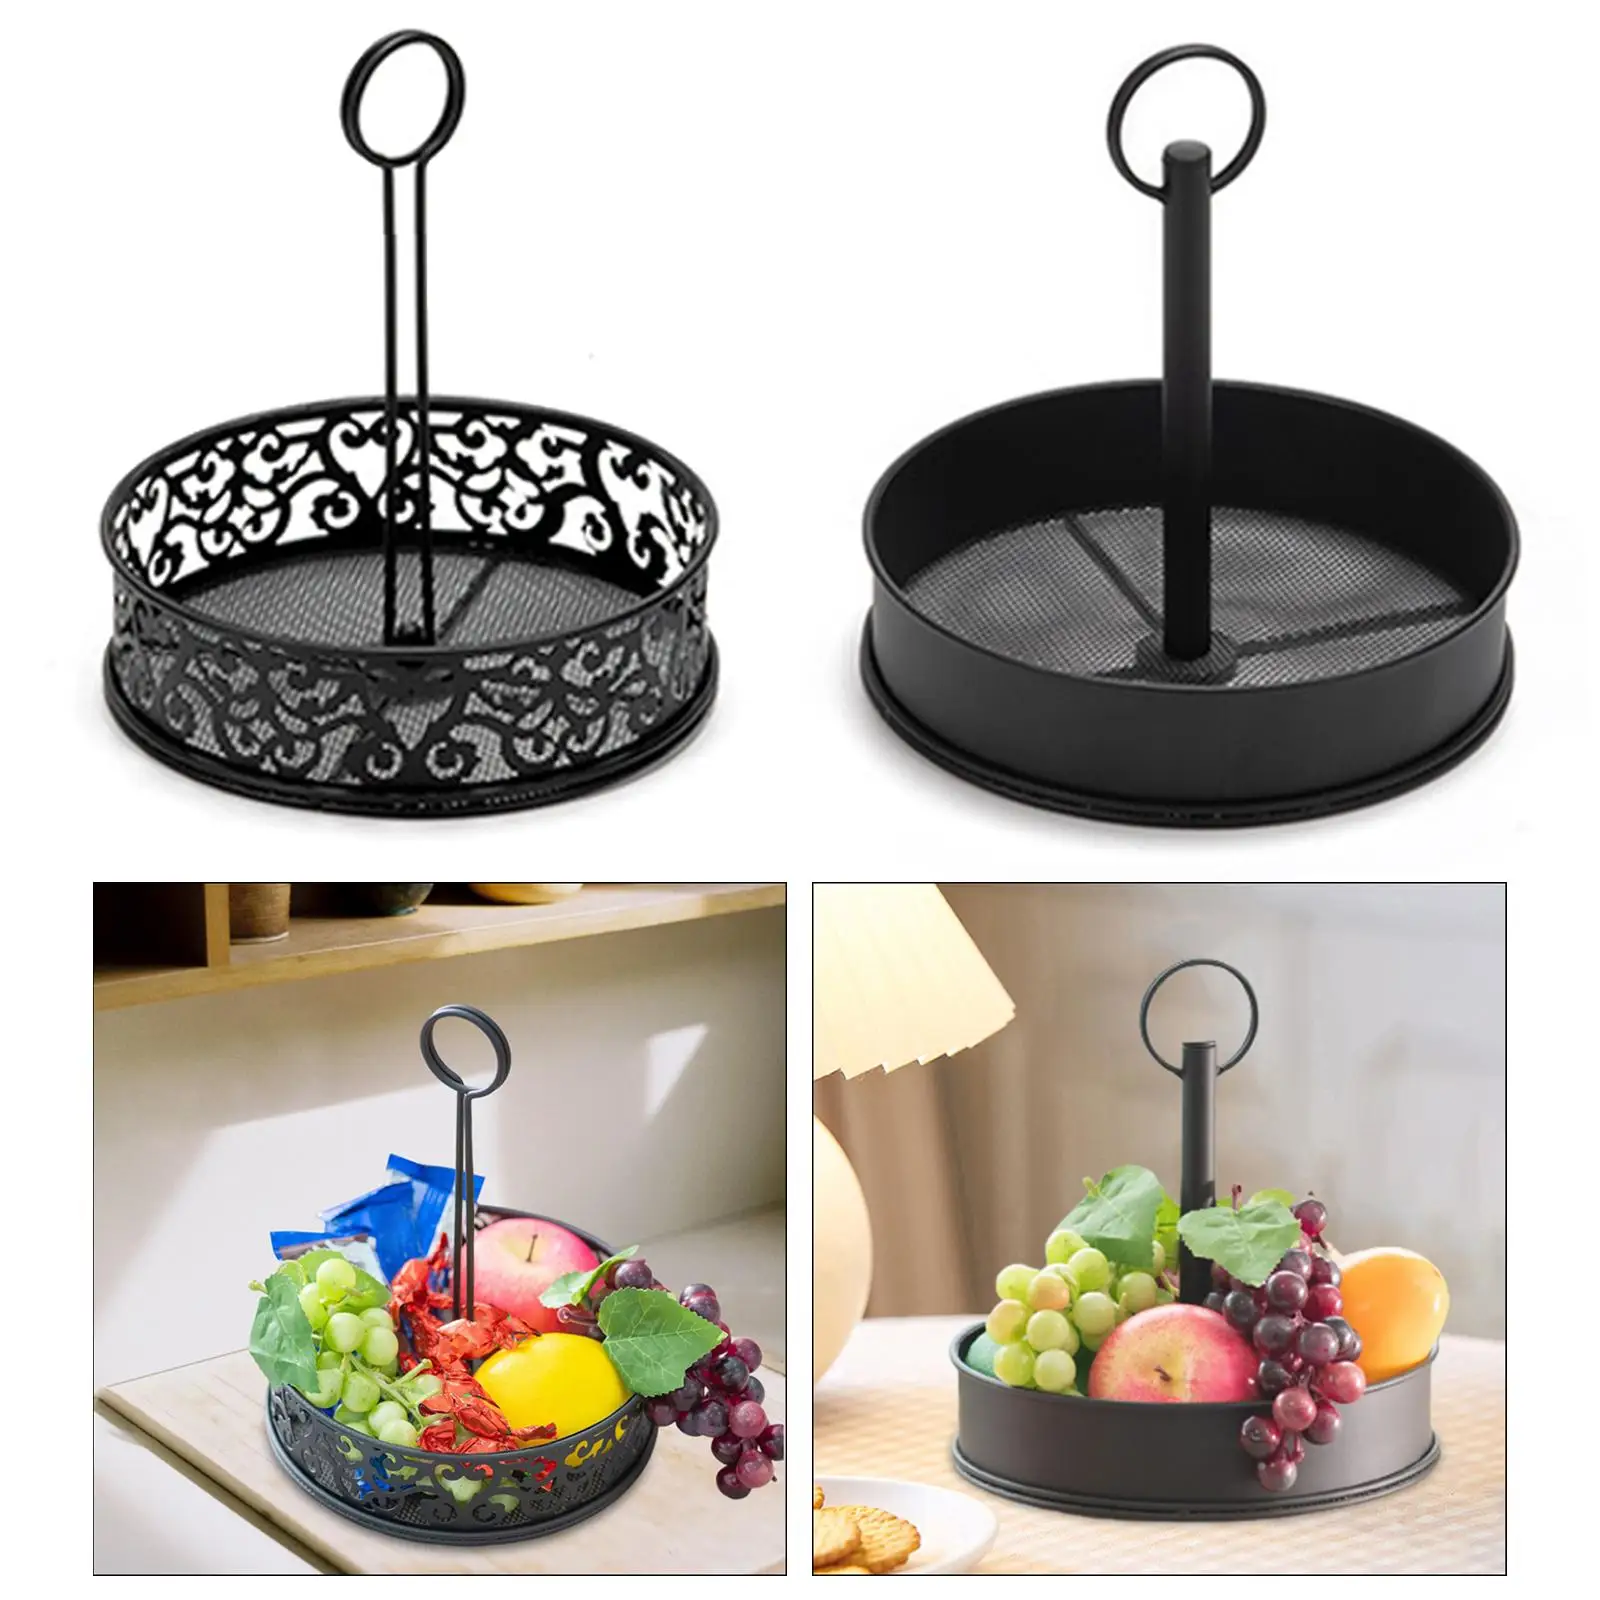 Fruit Basket with Handle Round Storage Tray for Kitchen Counter Dining Table